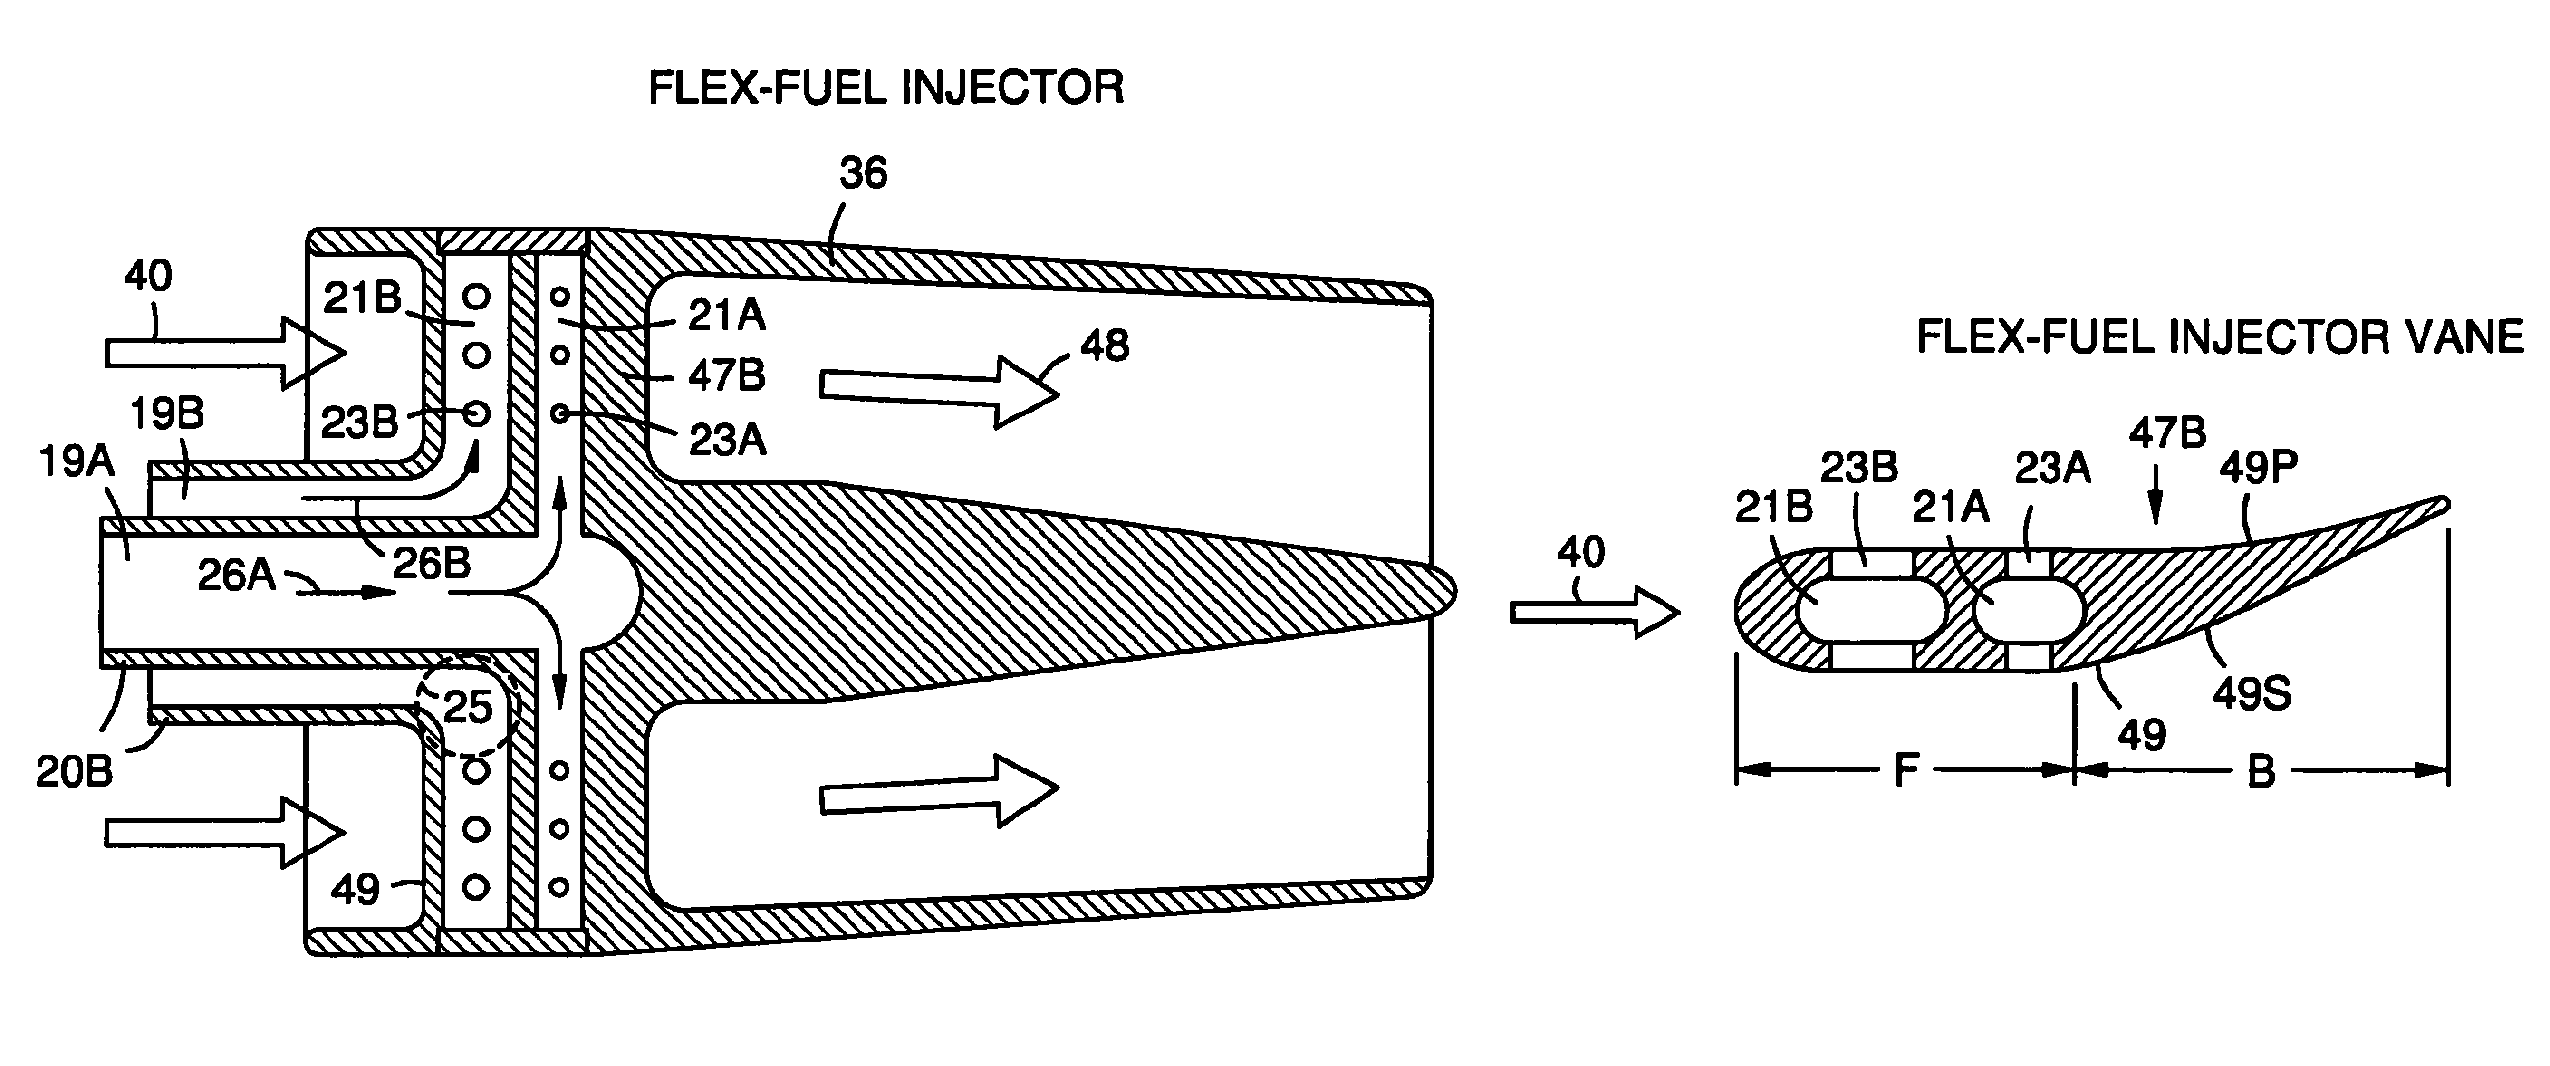 Flex-fuel injector for gas turbines